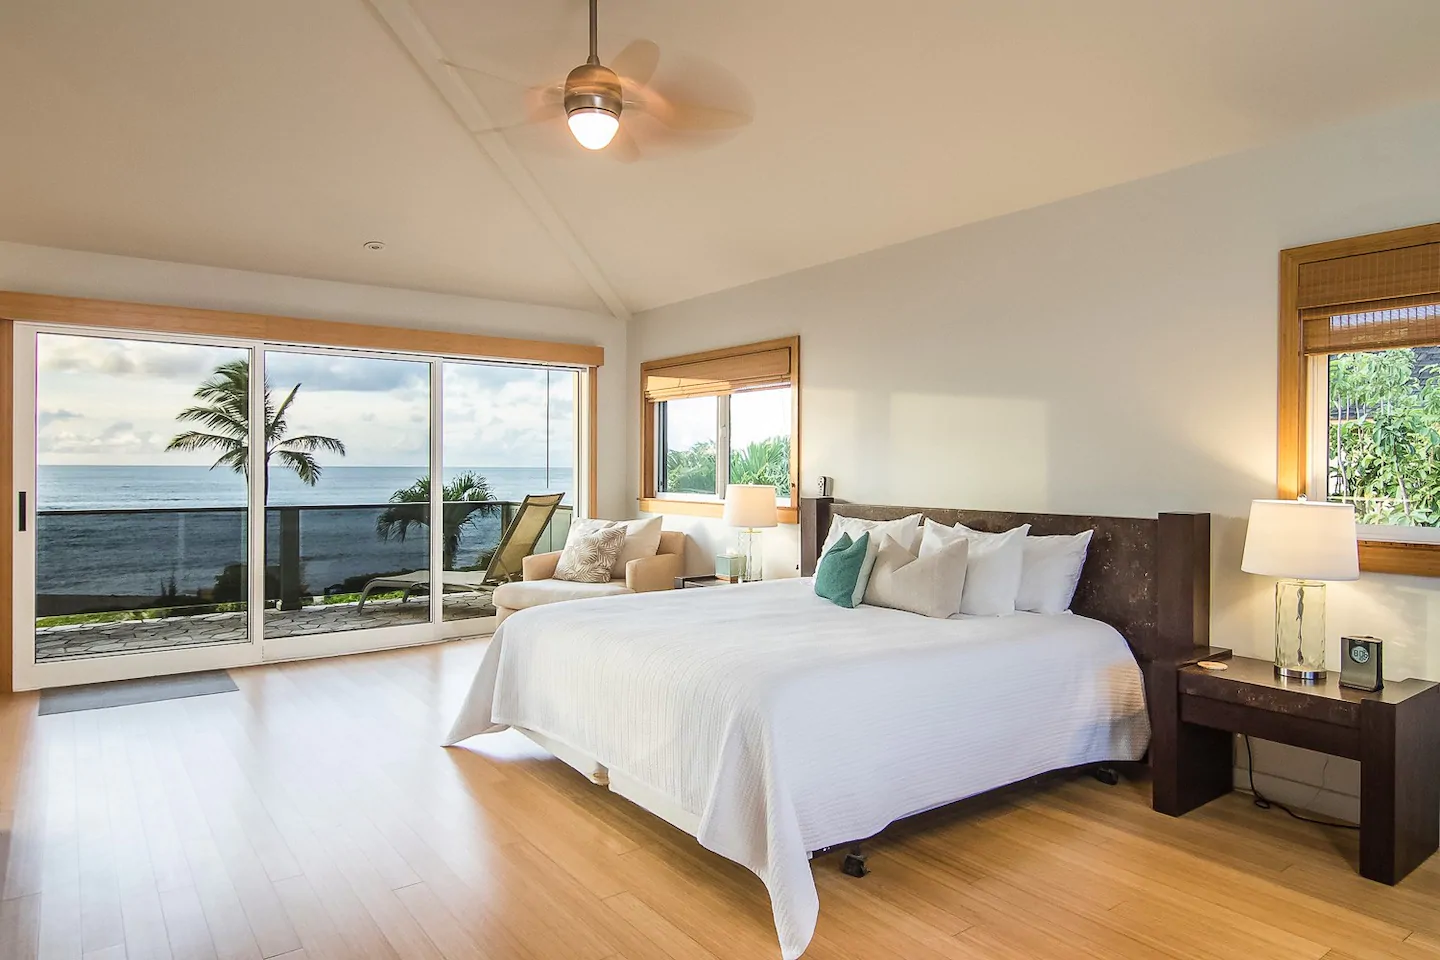 Oahu Airbnb with ocean view from master bedroom